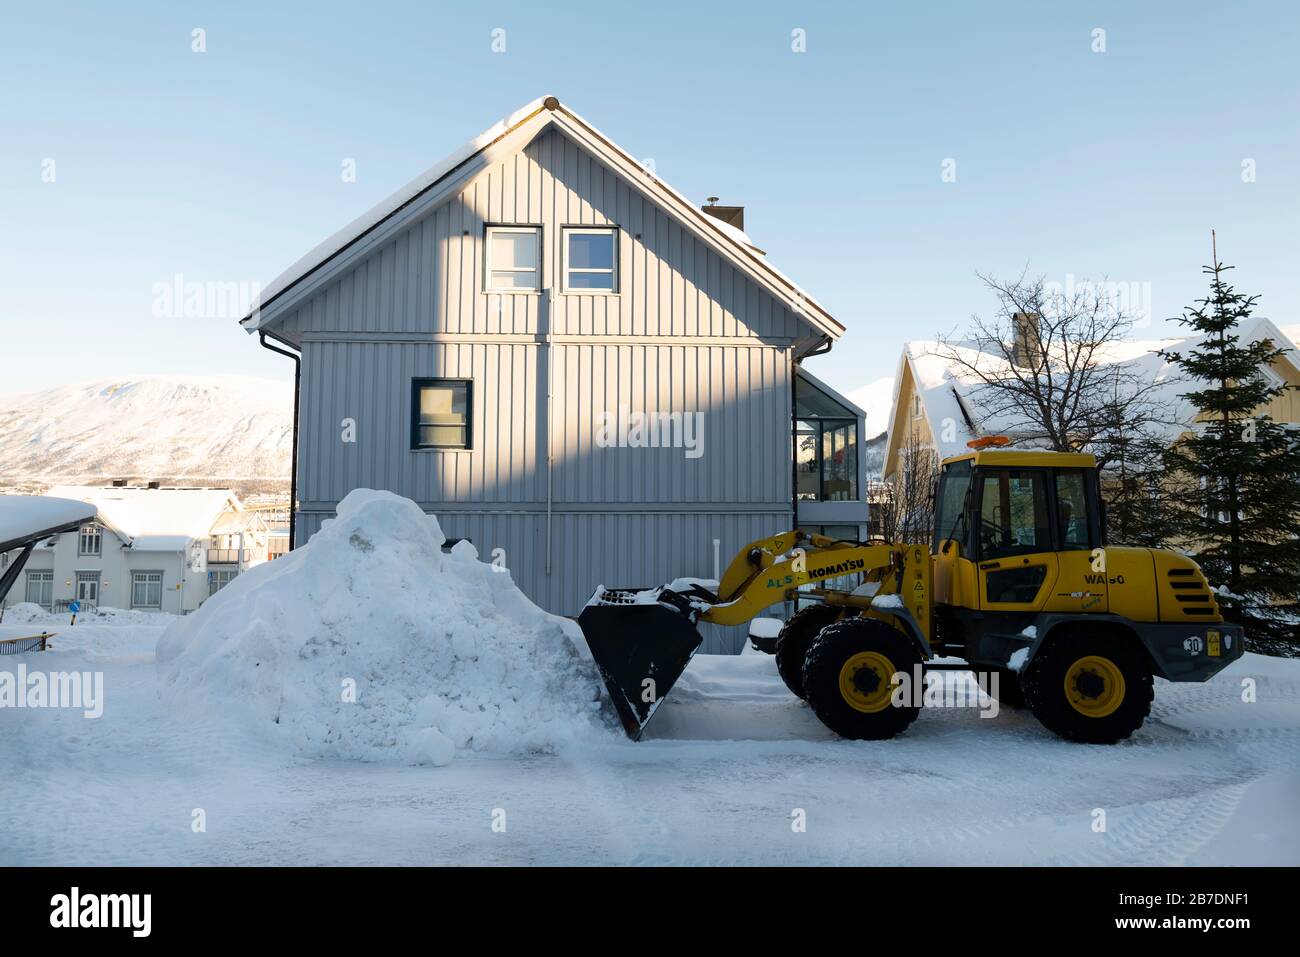 Clearing snow after a heavy snowfall, Tromso, Norway. Stock Photo